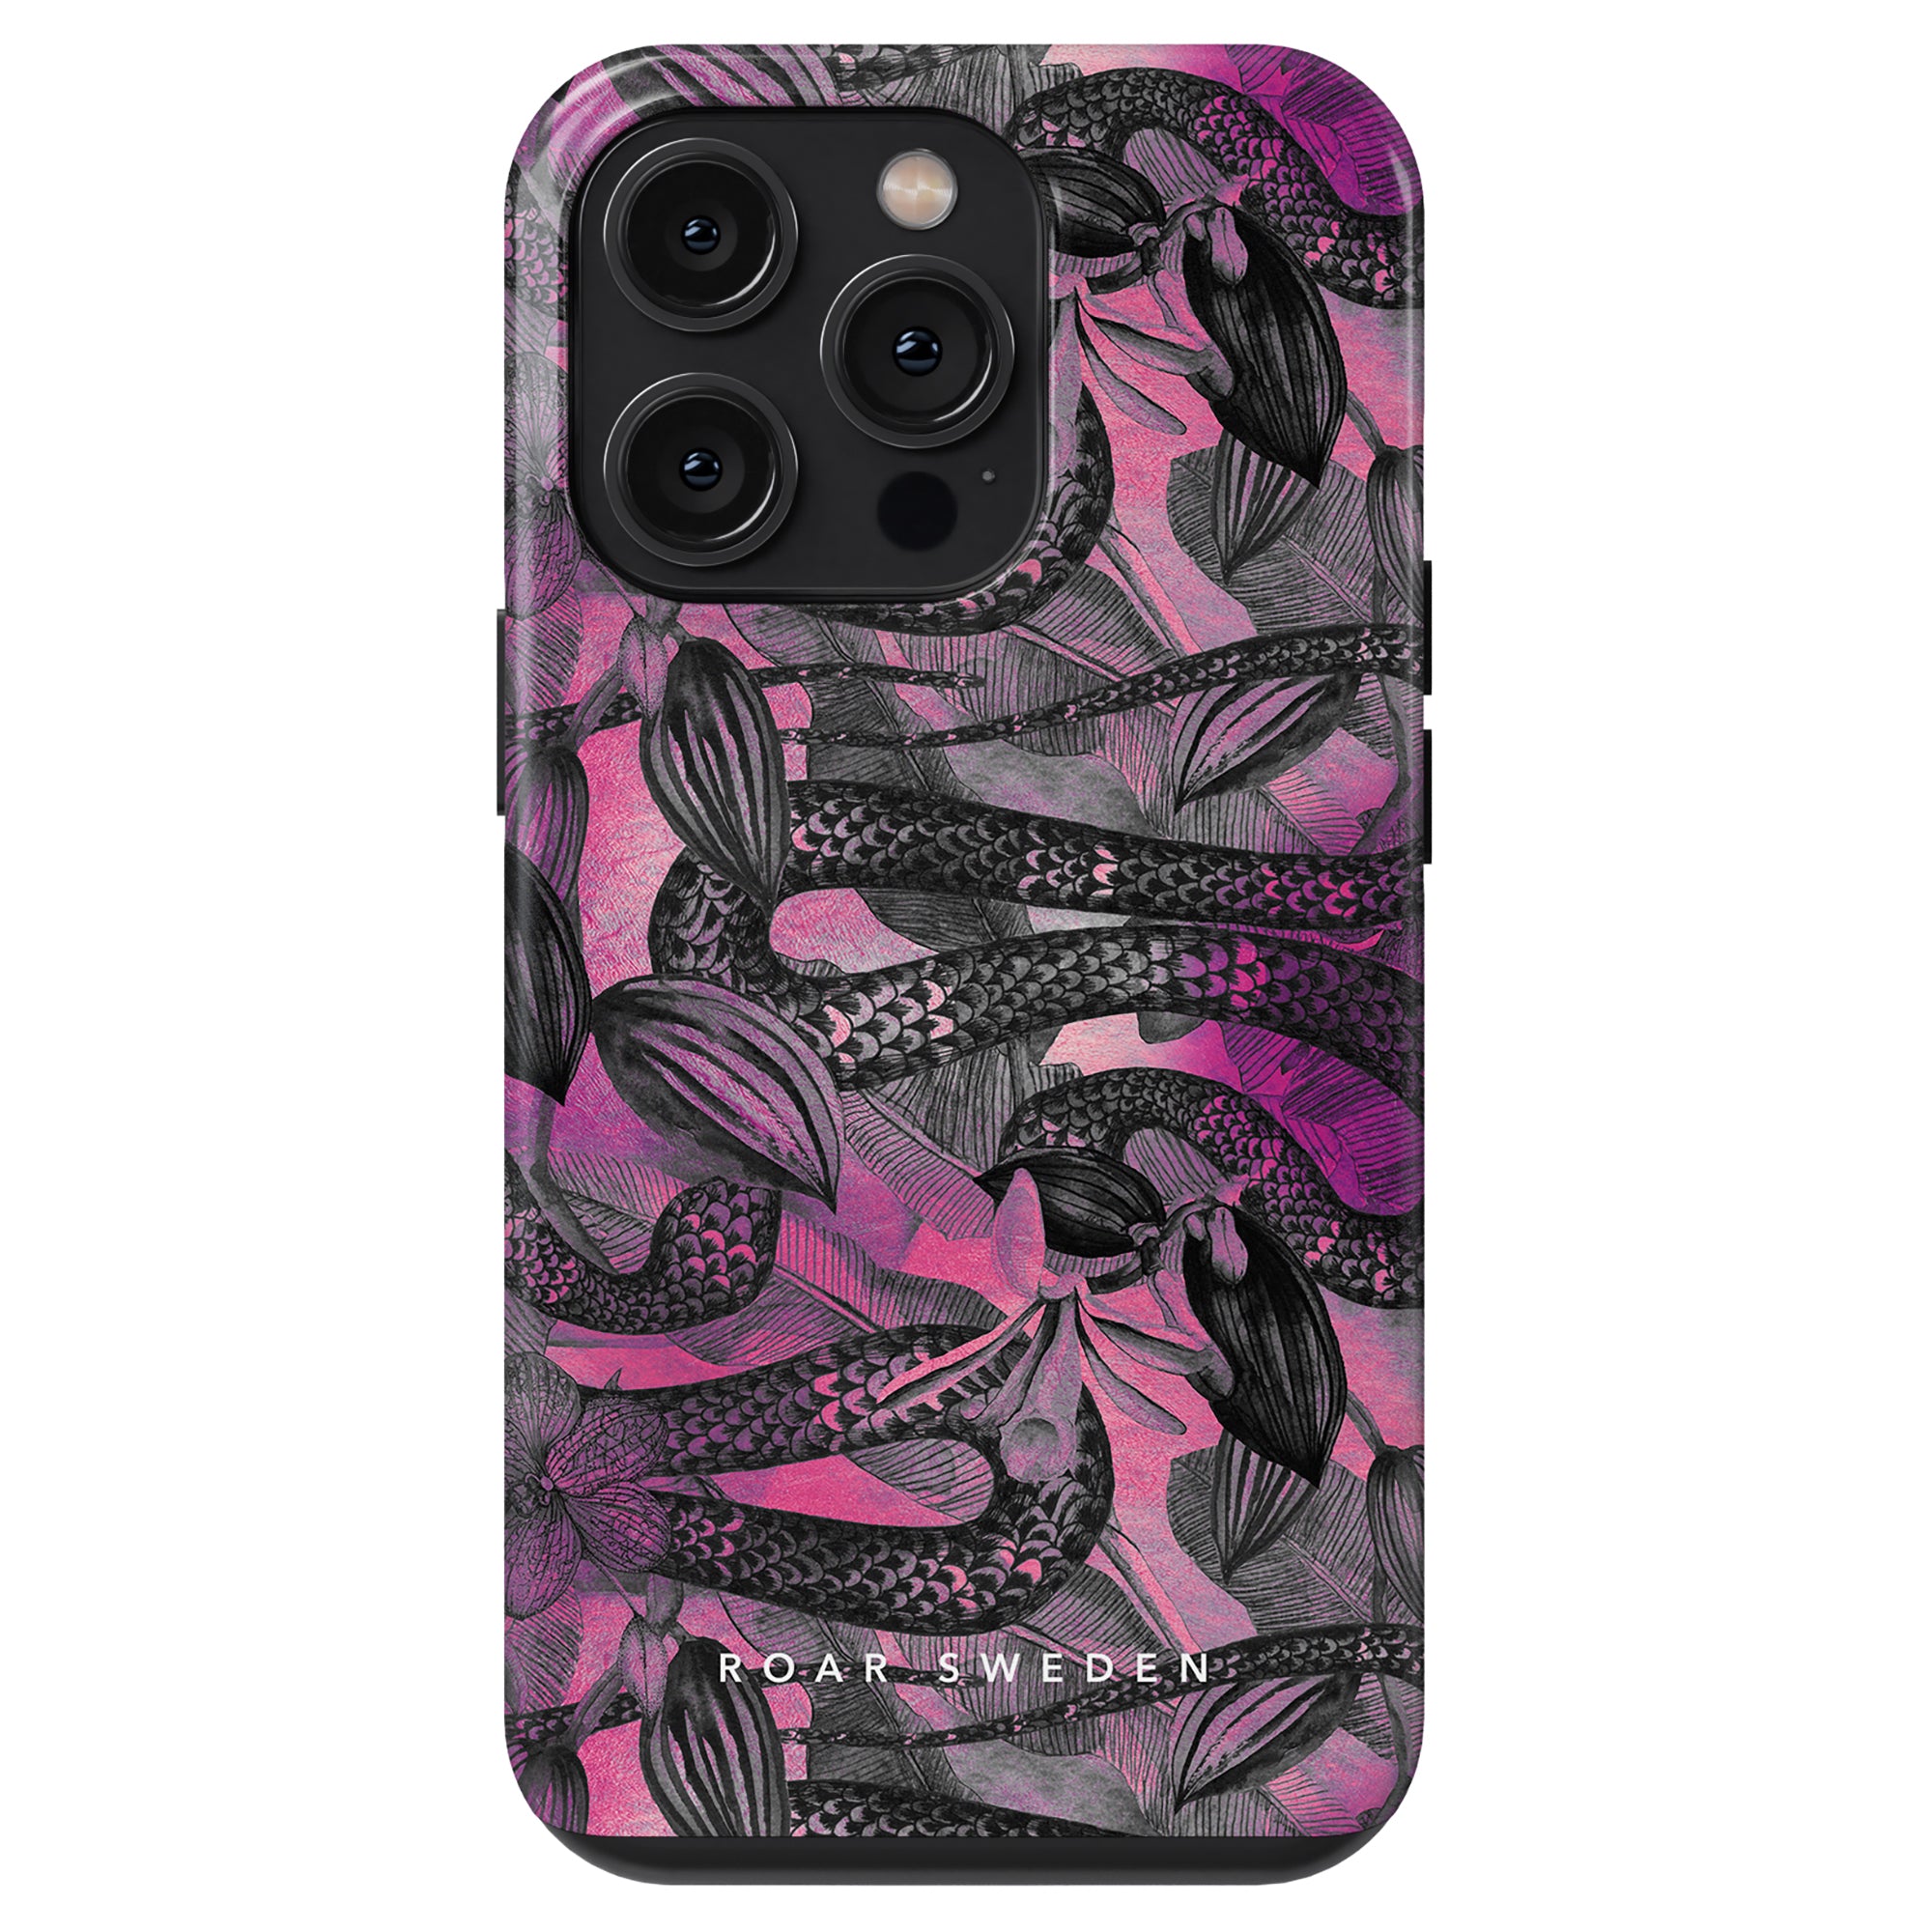 A pink and black Snake Nest - Tough Case with mermaids on it. This Snake Nest - Tough Case is the perfect addition to your collection.